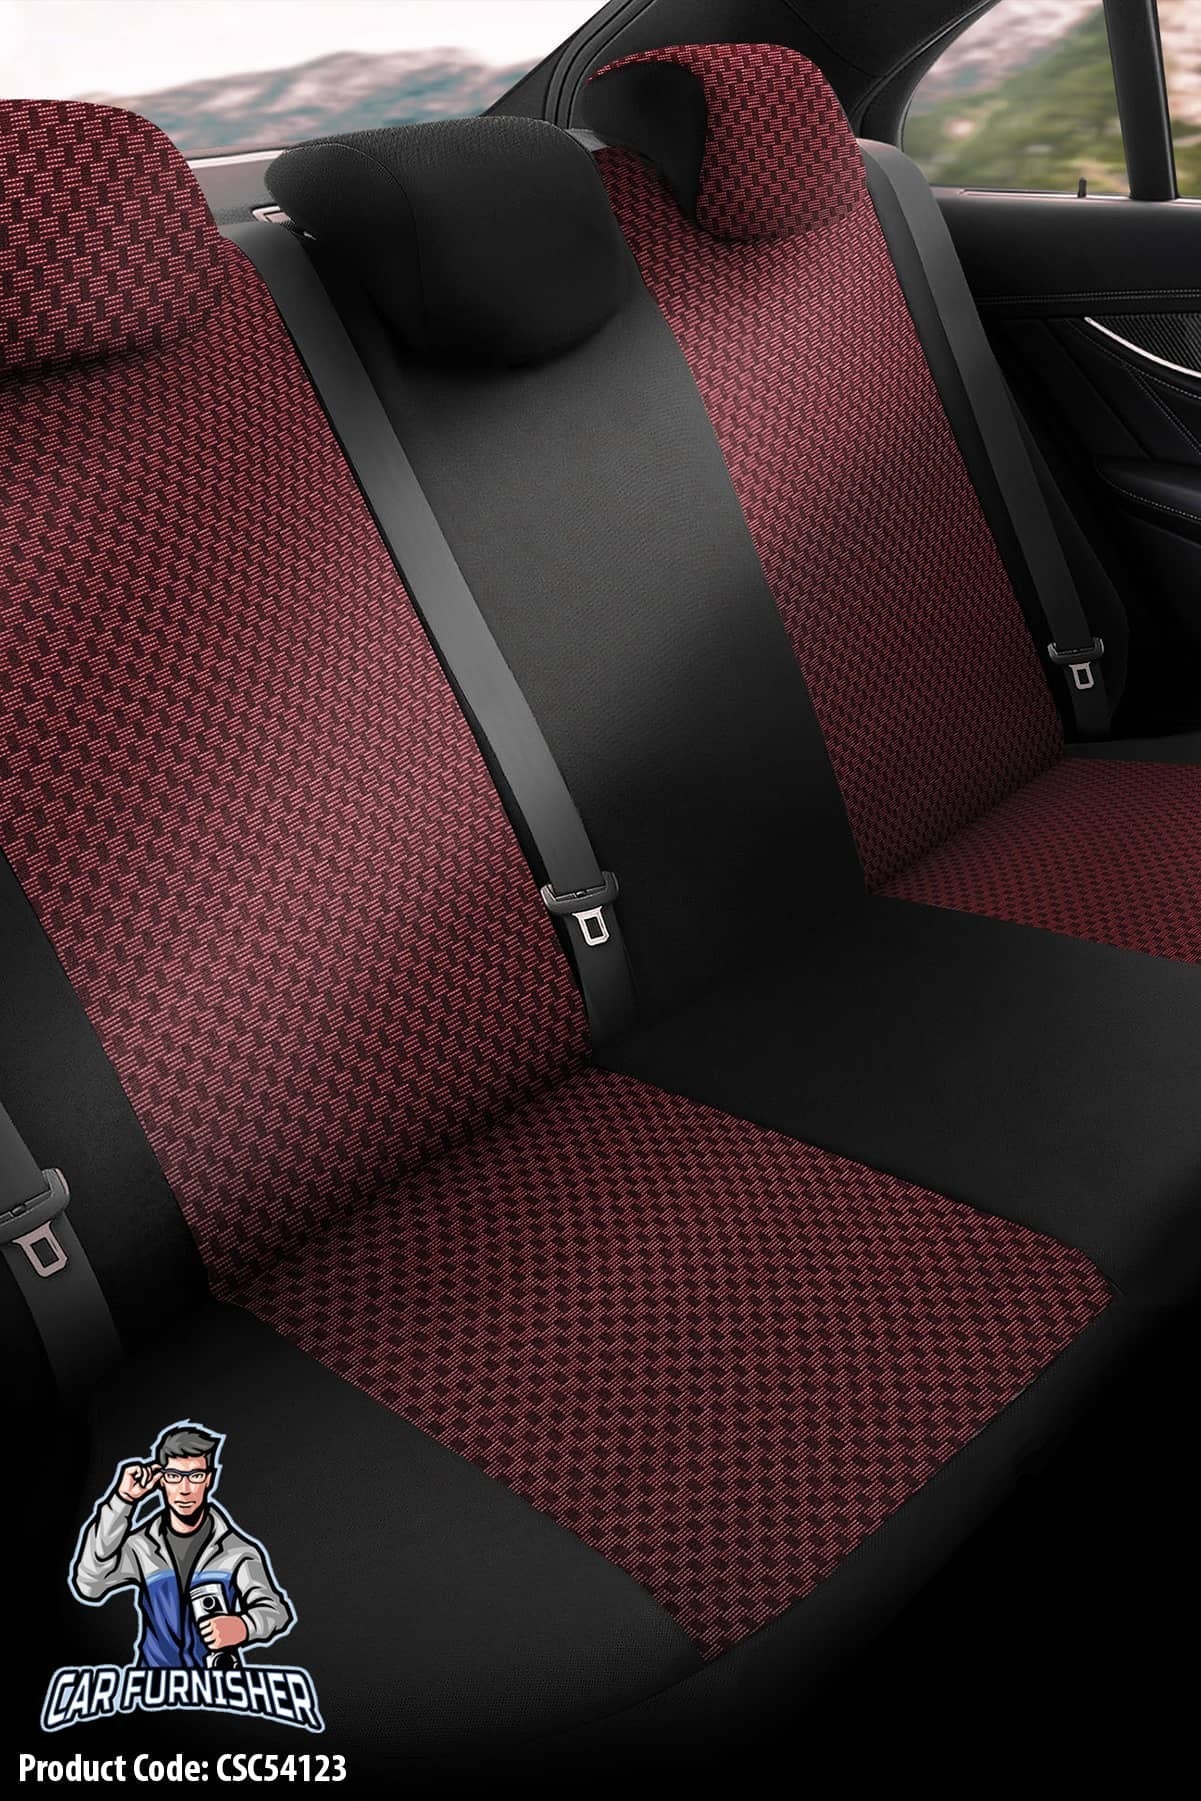 Mercedes 190 Seat Covers Line Design Red 5 Seats + Headrests (Full Set) Leather & Cotton Fabric